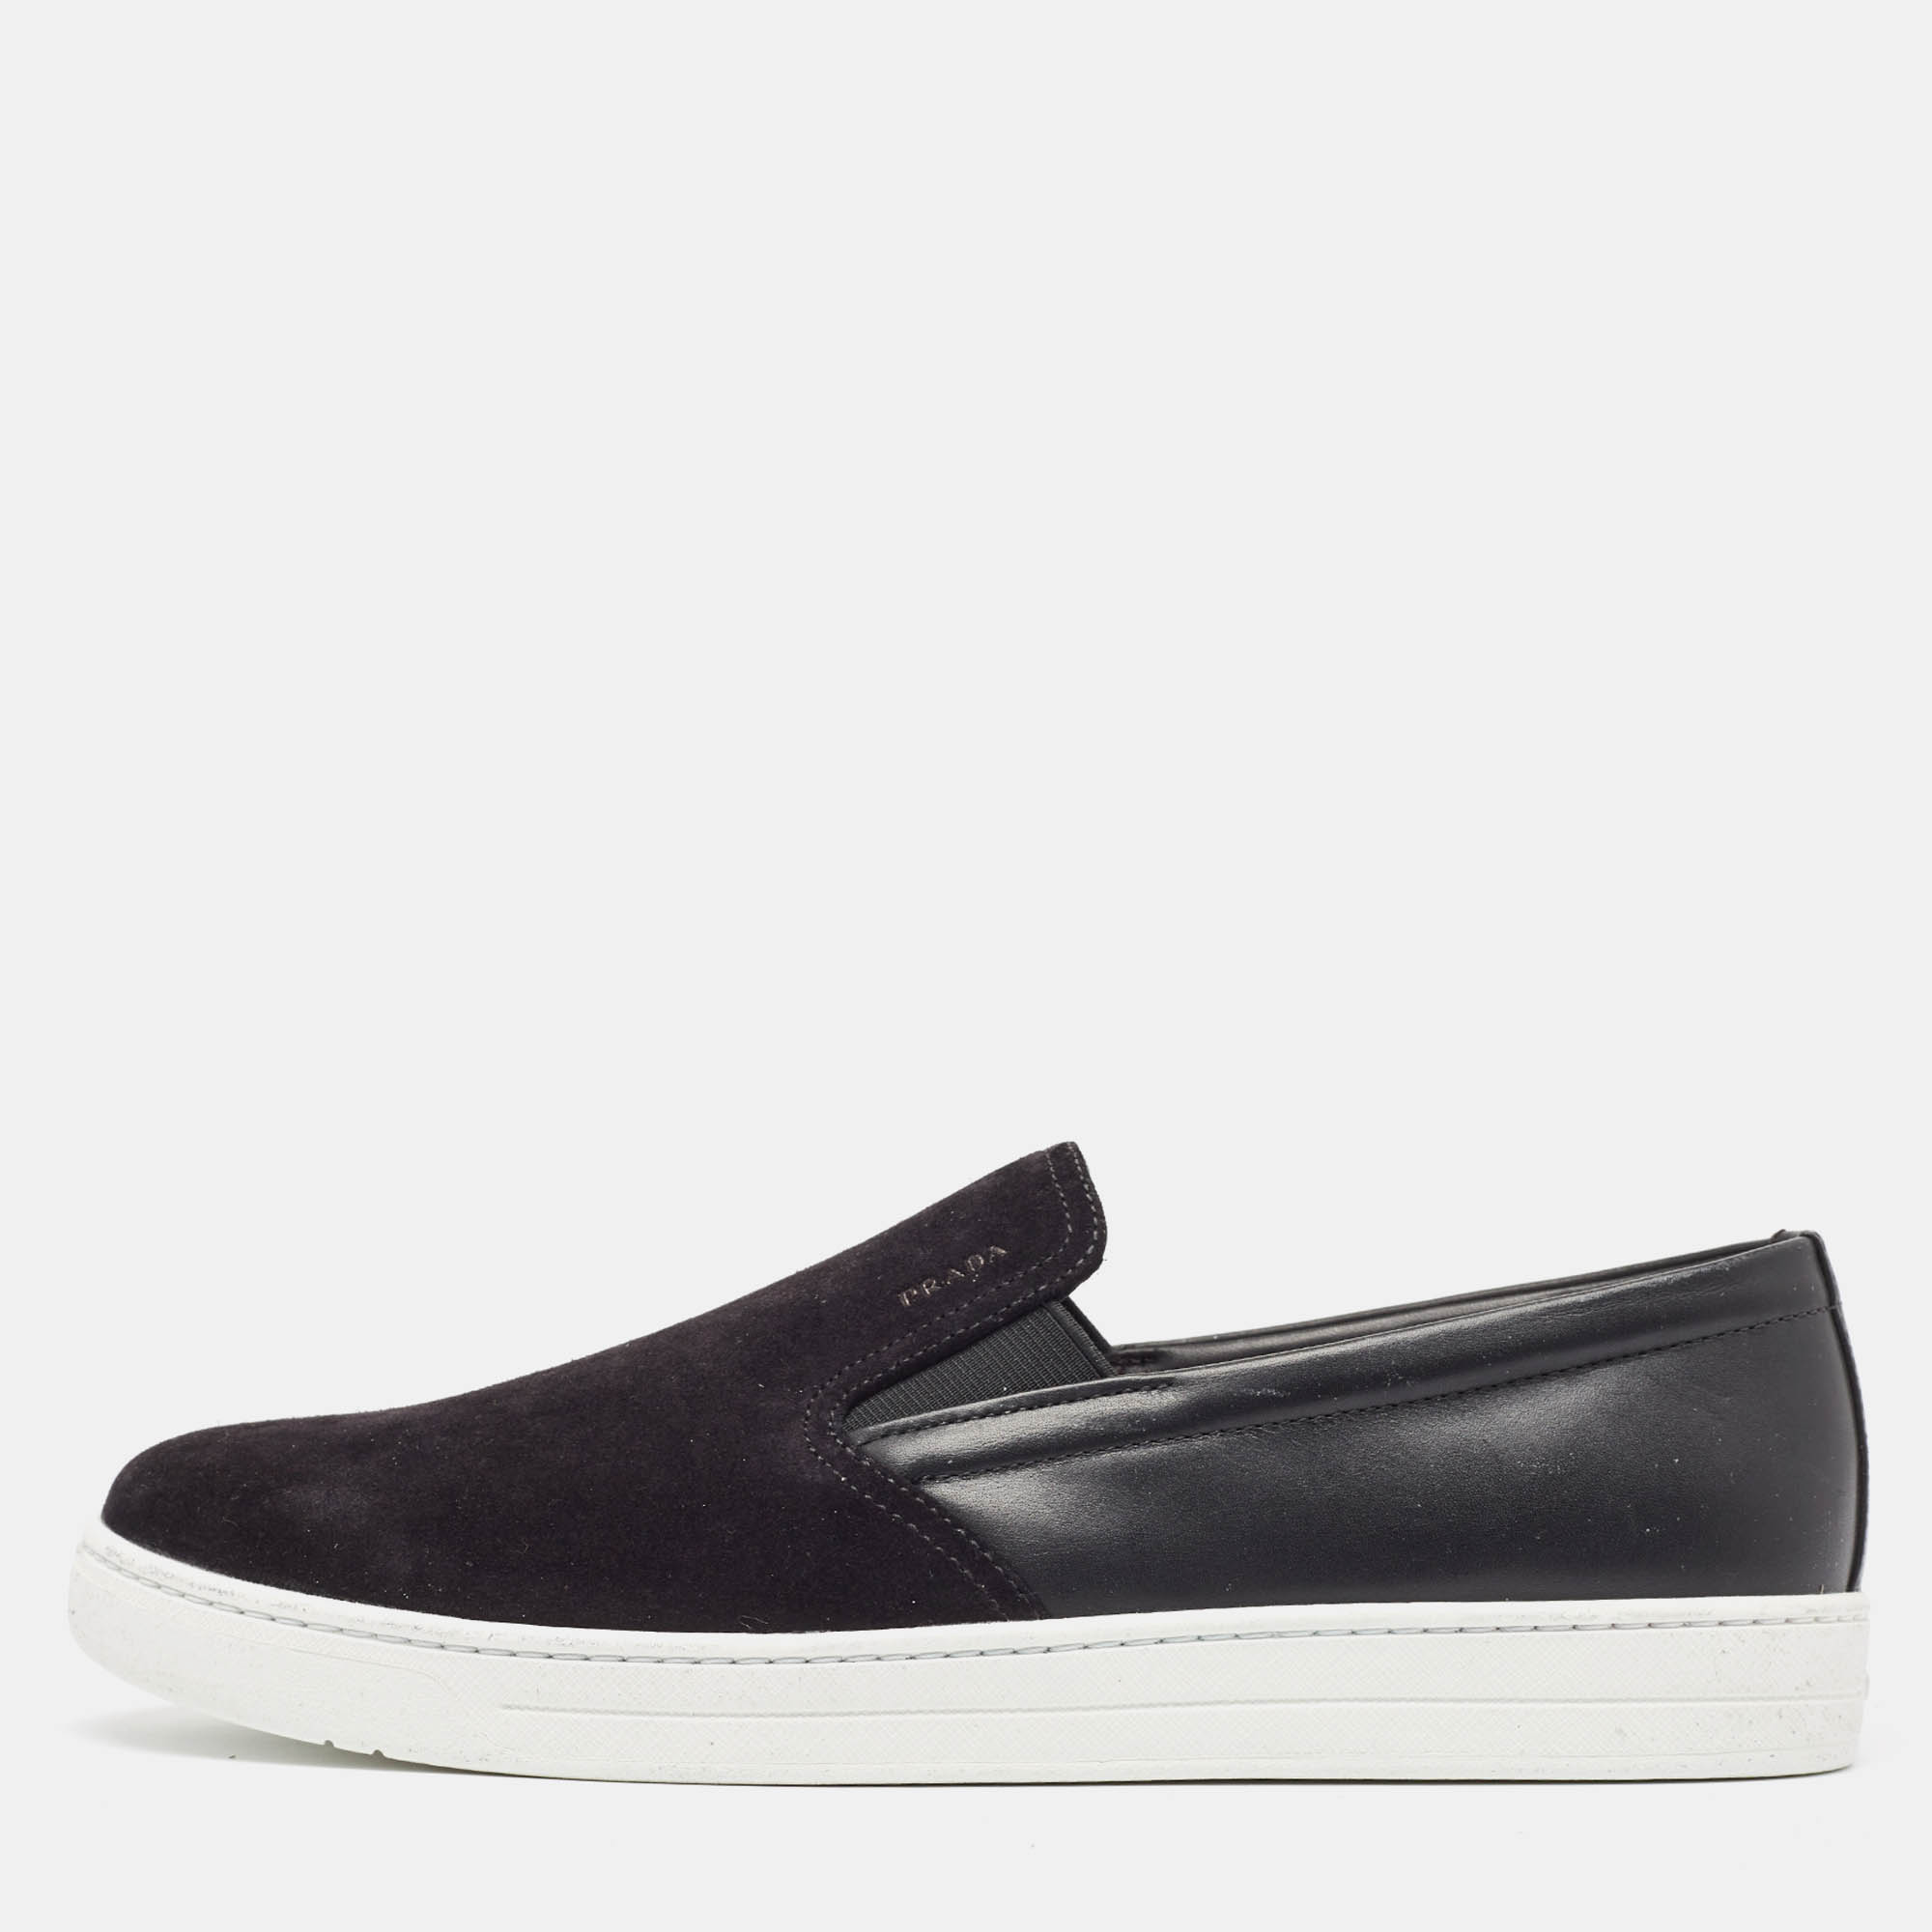 

Prada Sport Black Suede and Leather Slip On Sneakers Size